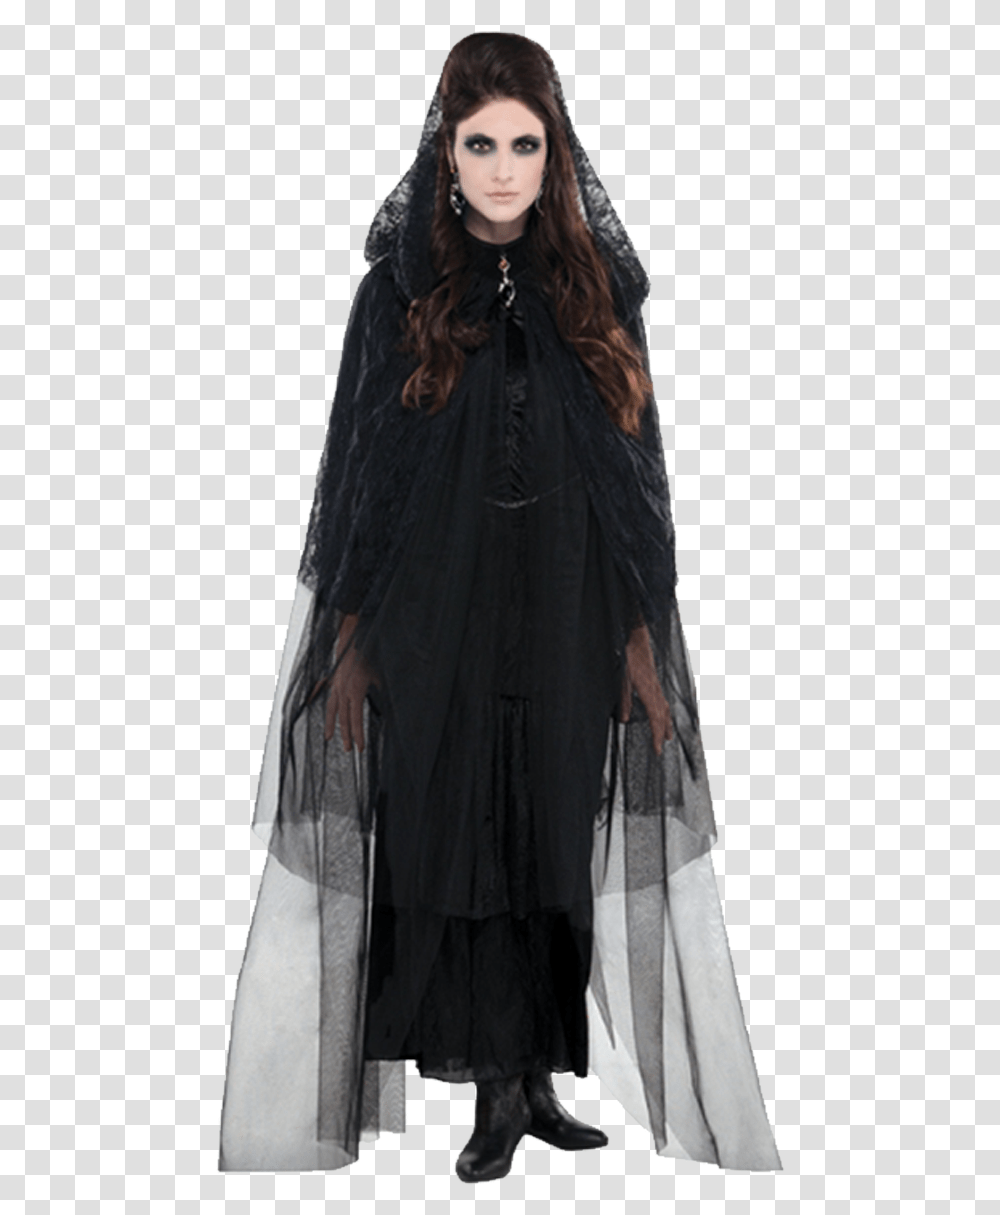 Witch Costumes & Accessories Hooded Sheer Black Cape, Clothing, Apparel, Fashion, Cloak Transparent Png